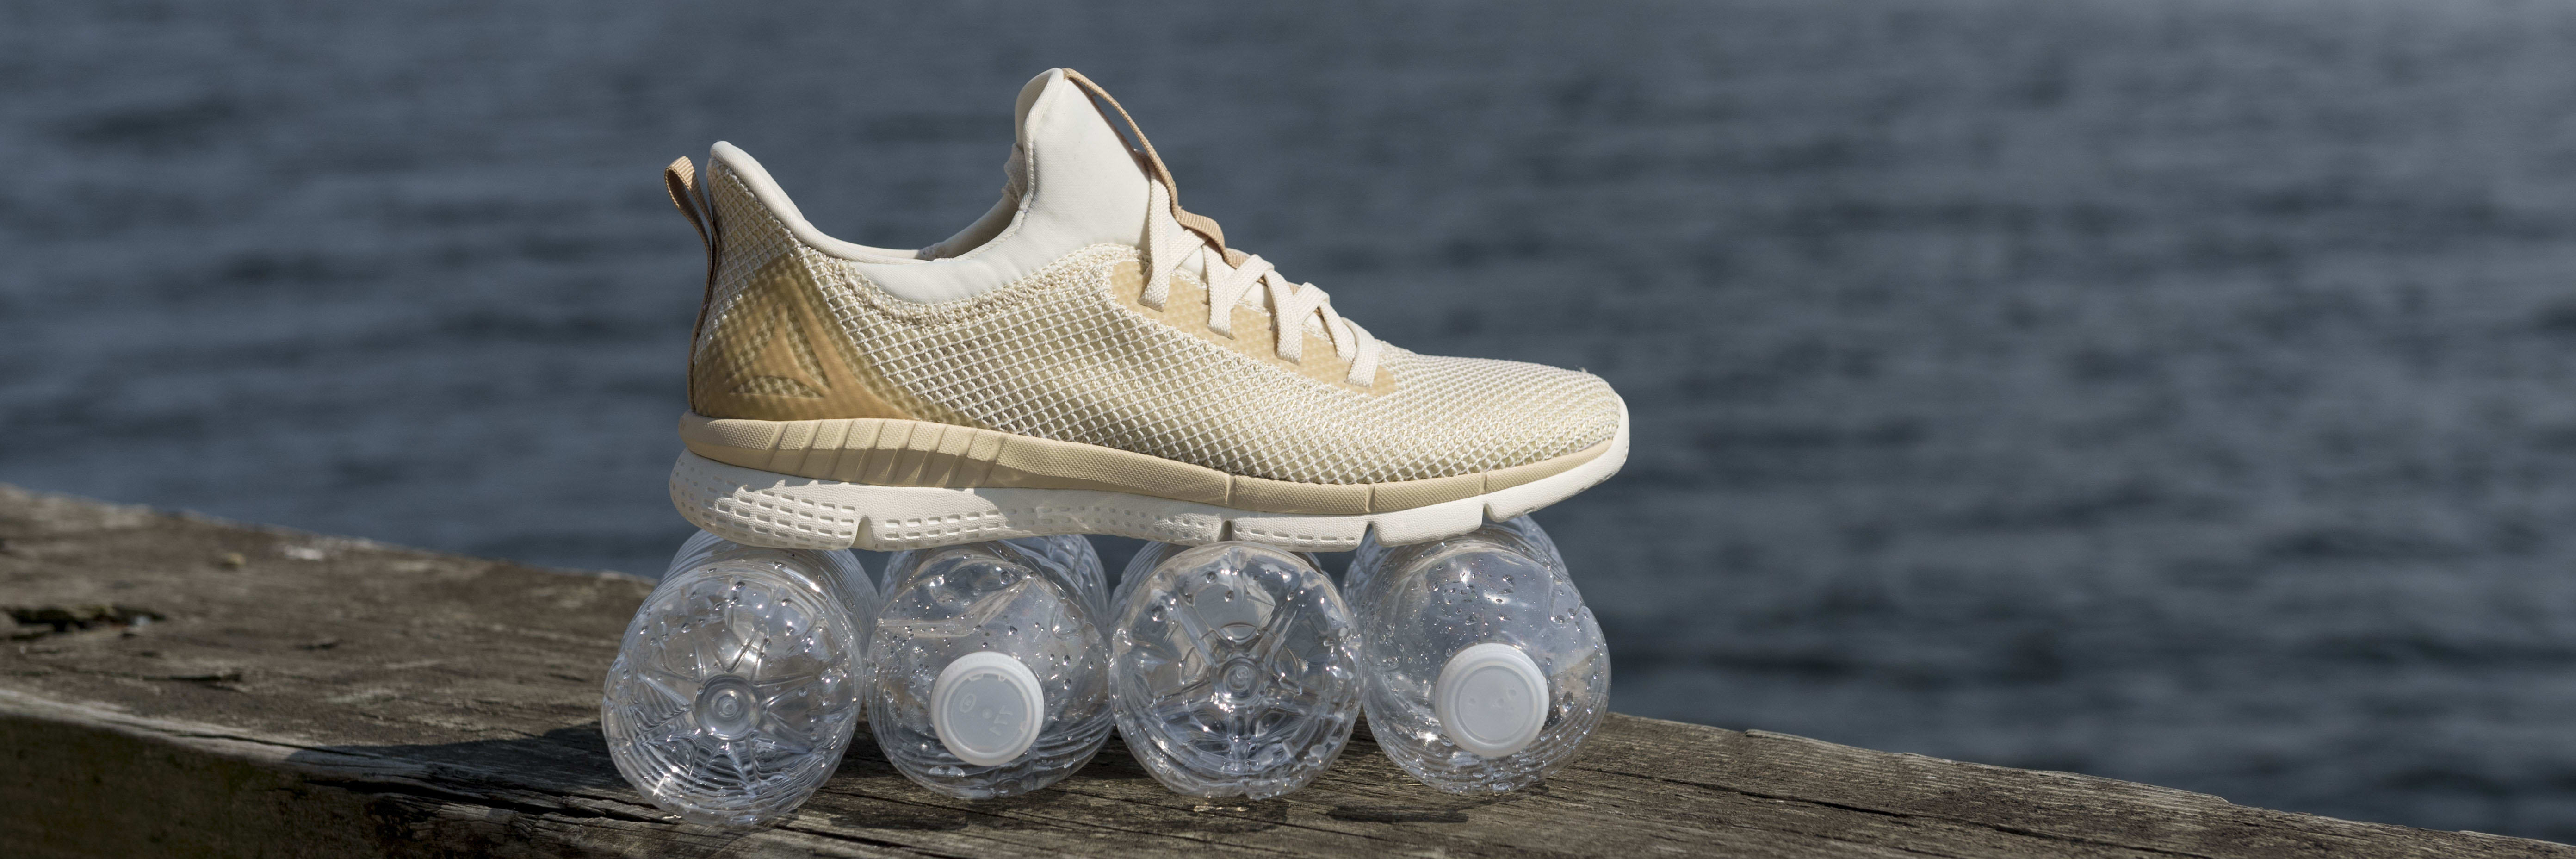 recyclable running shoes